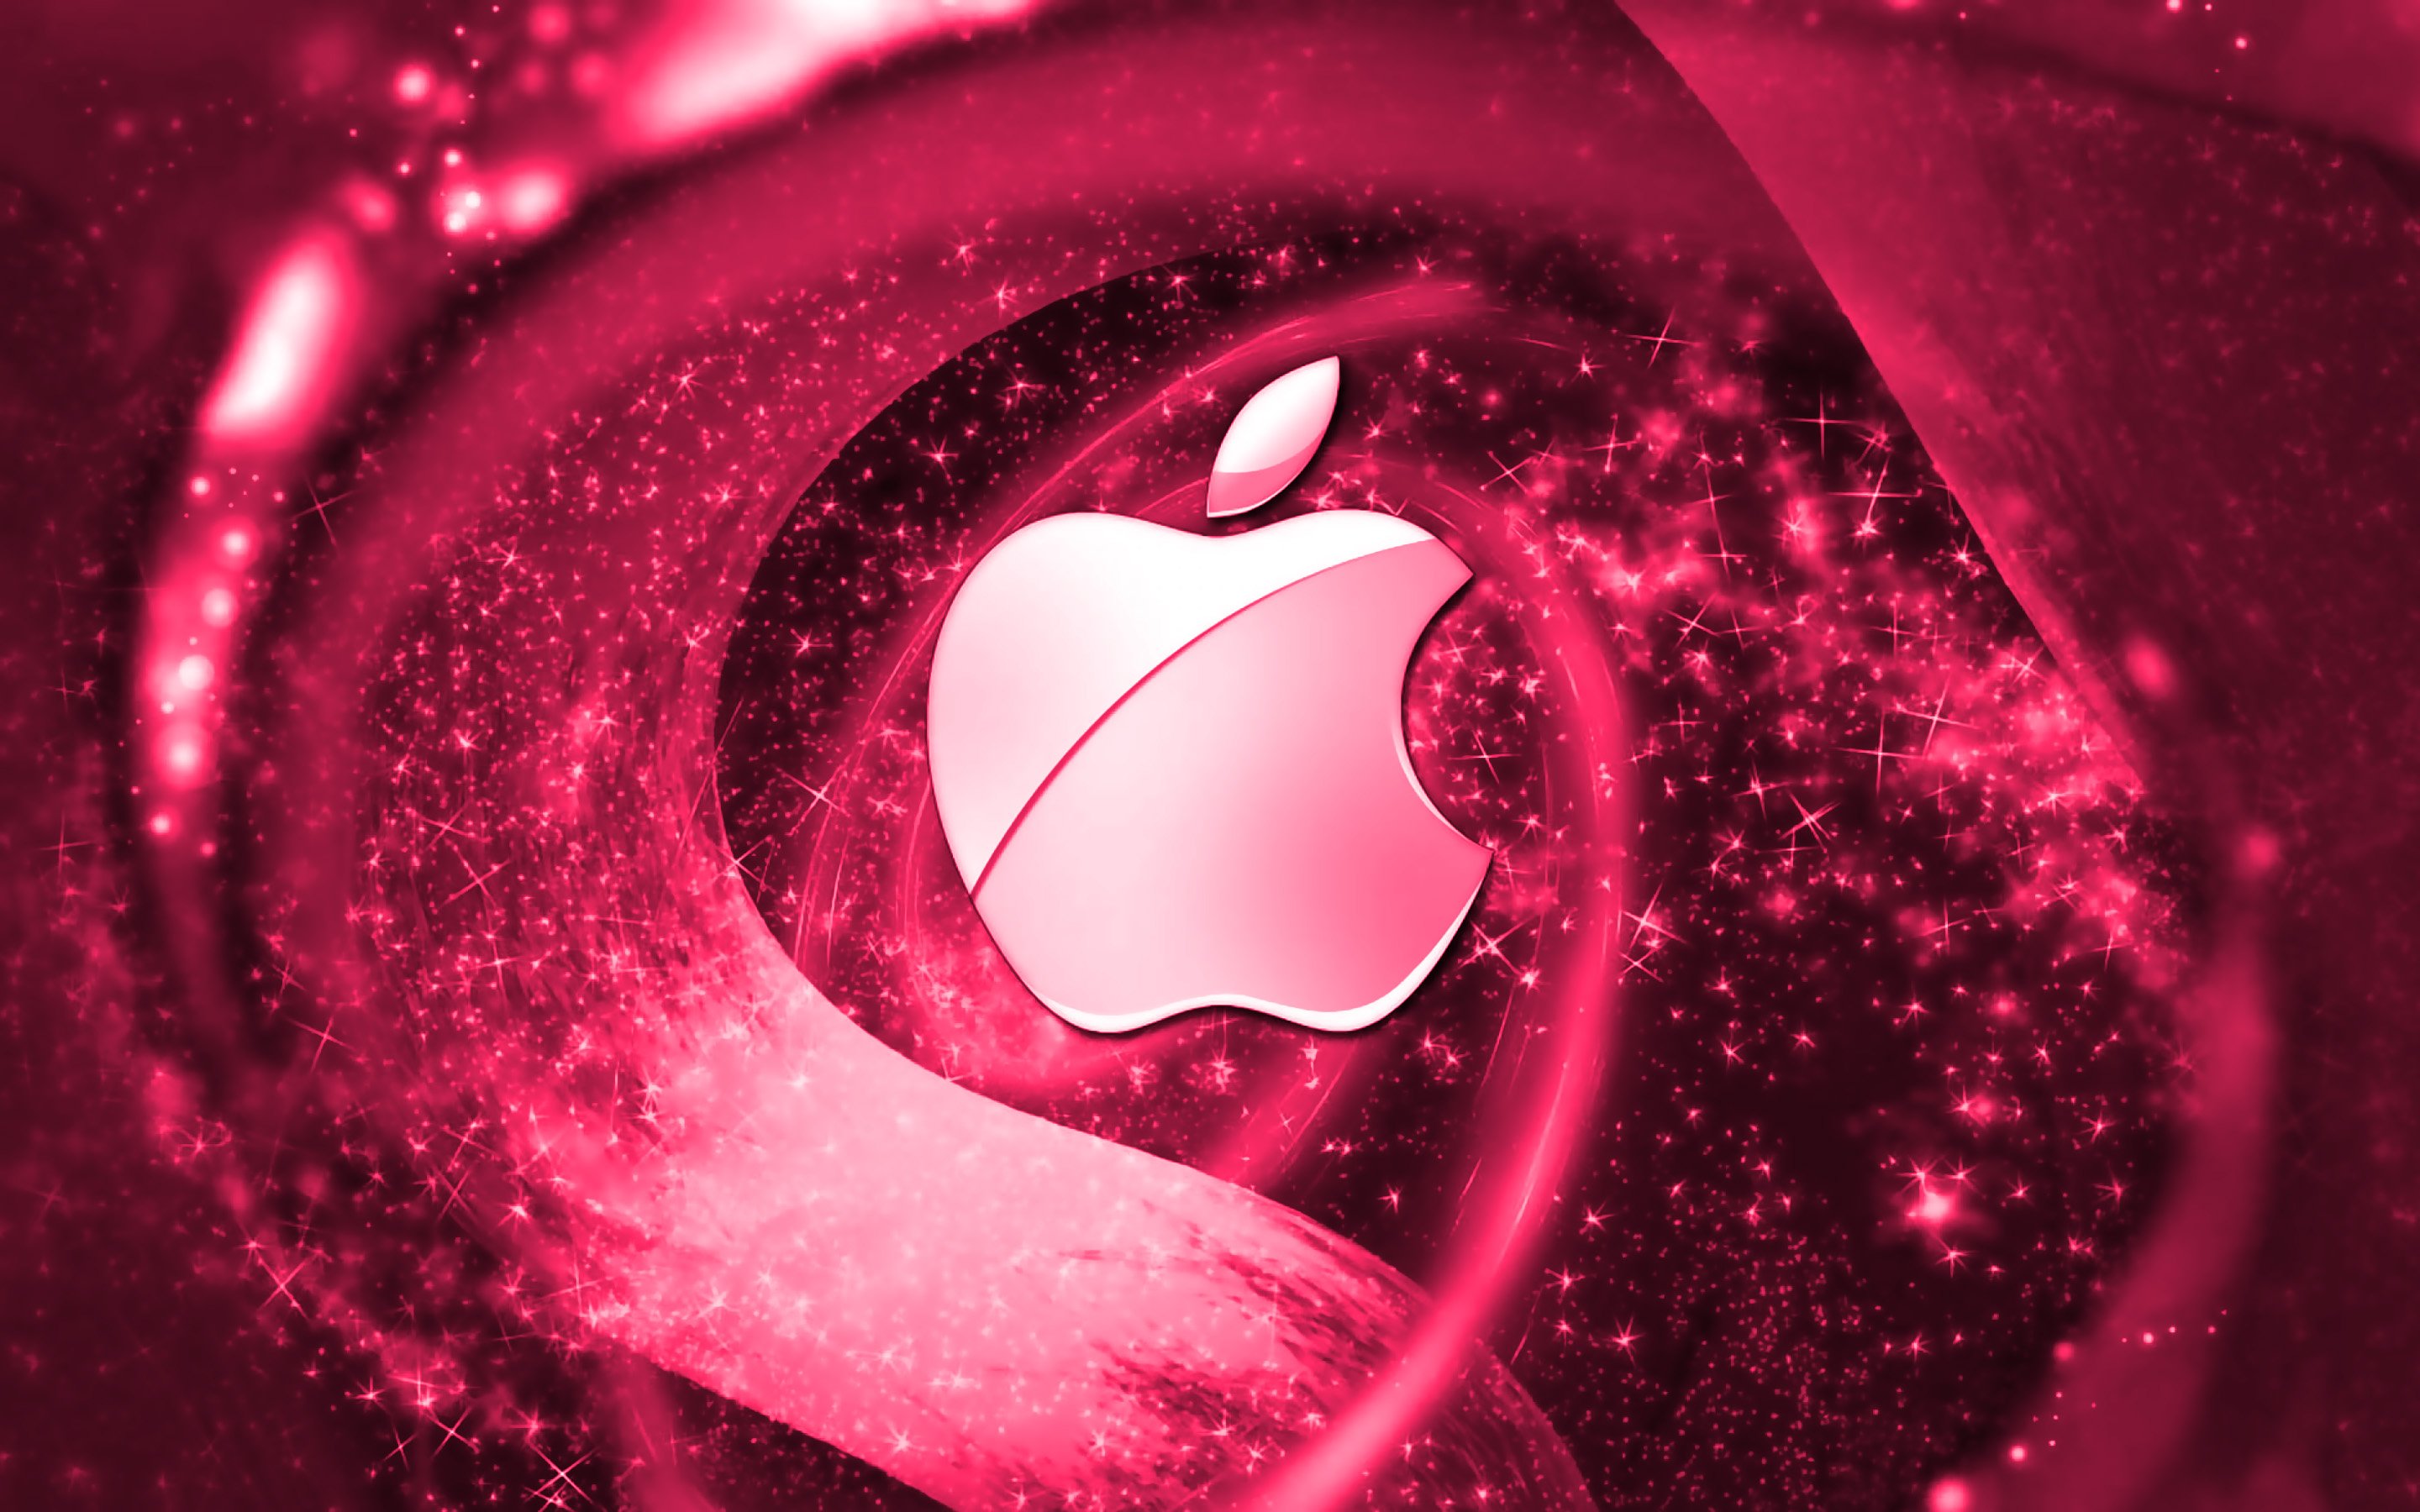 Download wallpaper Apple pink logo, space, creative, Apple, stars, Apple logo, digital art, pink background for desktop with resolution 2880x1800. High Quality HD picture wallpaper